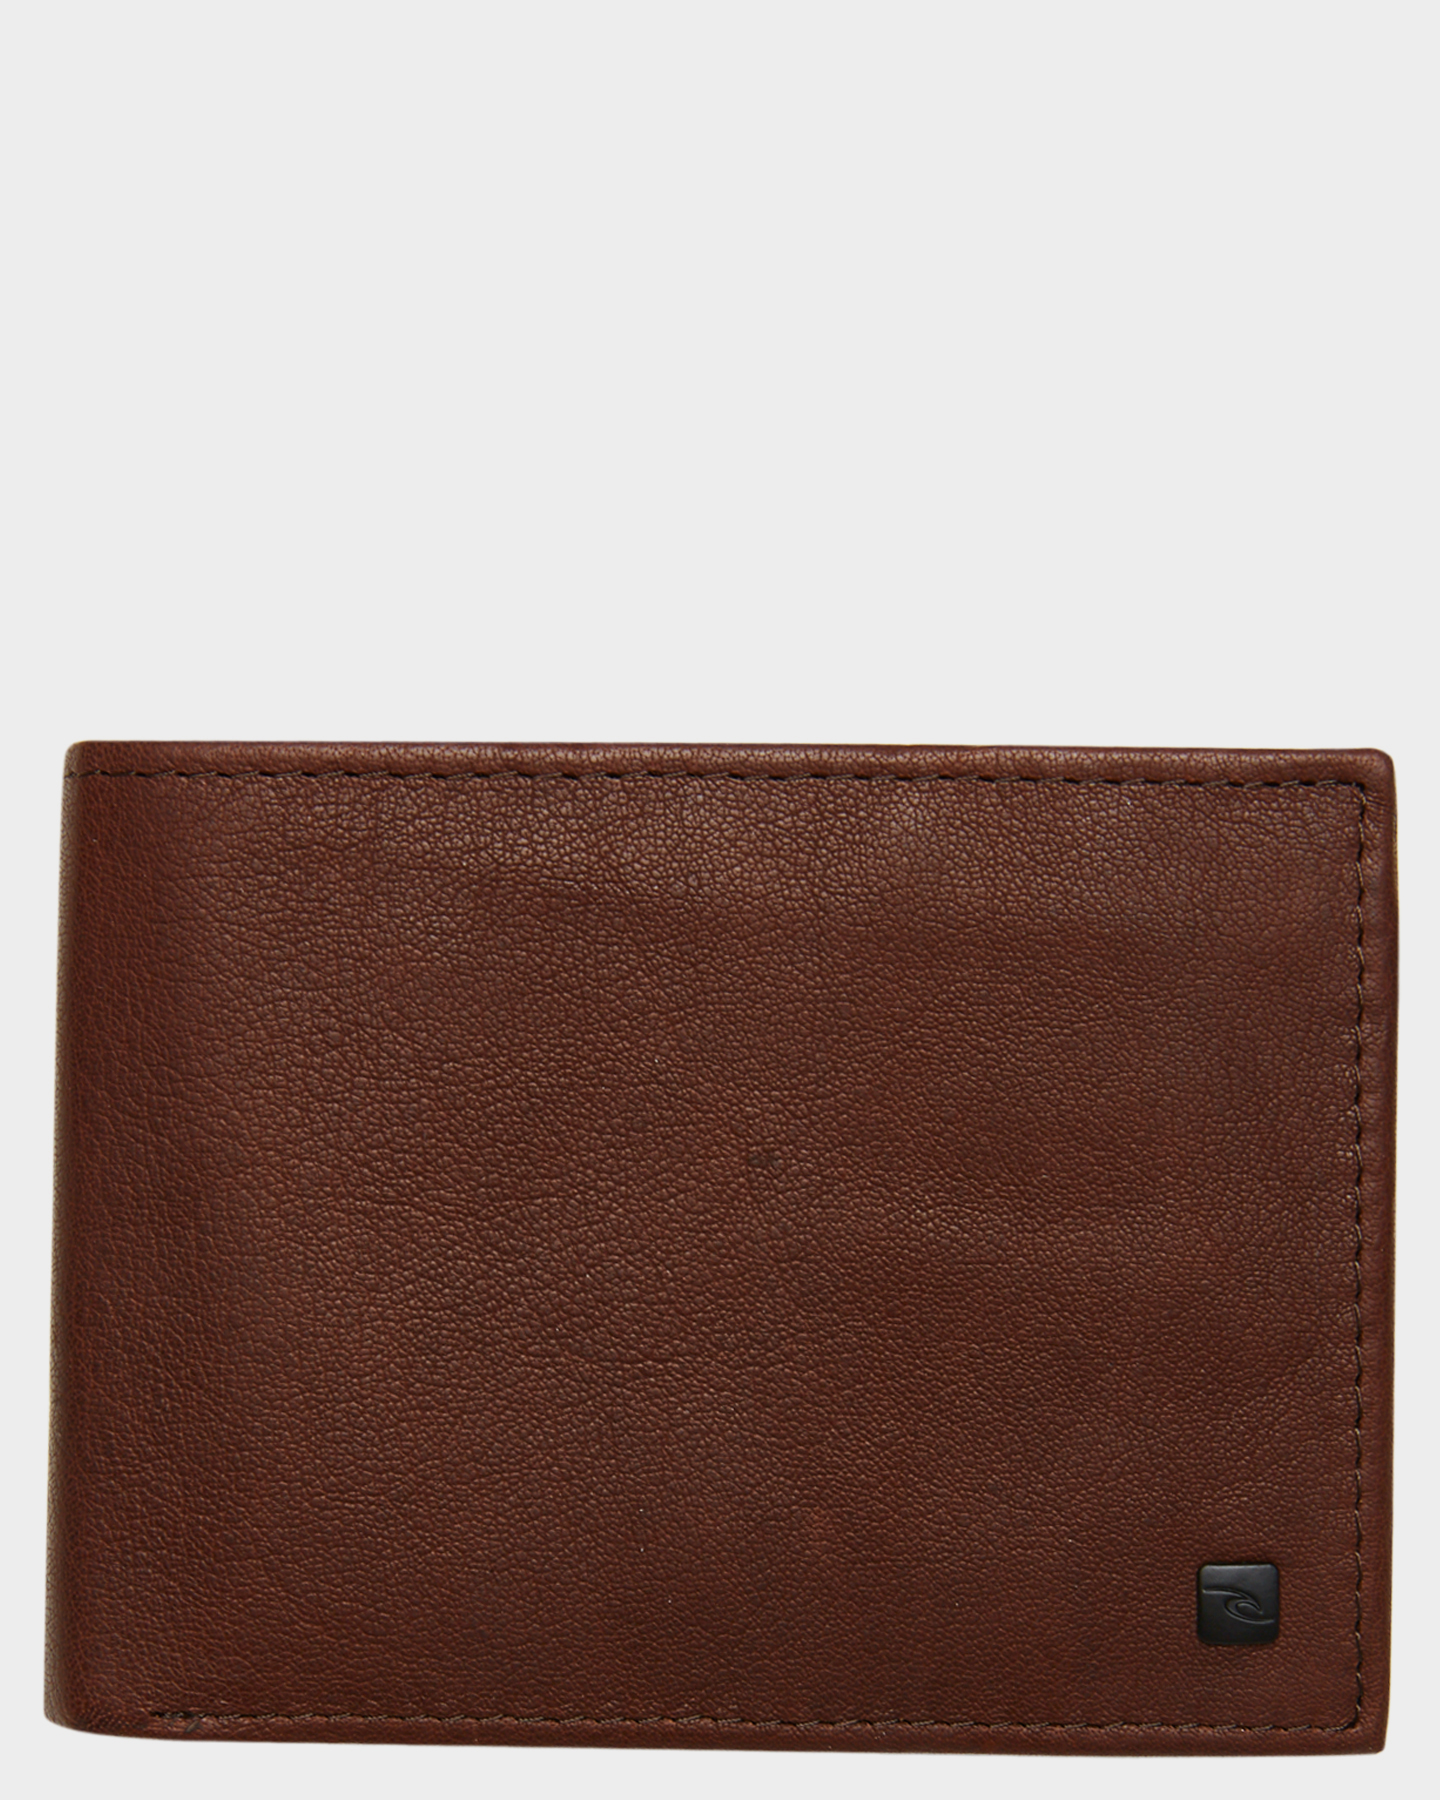 Rip Curl K-Roo Rfid All Day Wallet - Brown | SurfStitch